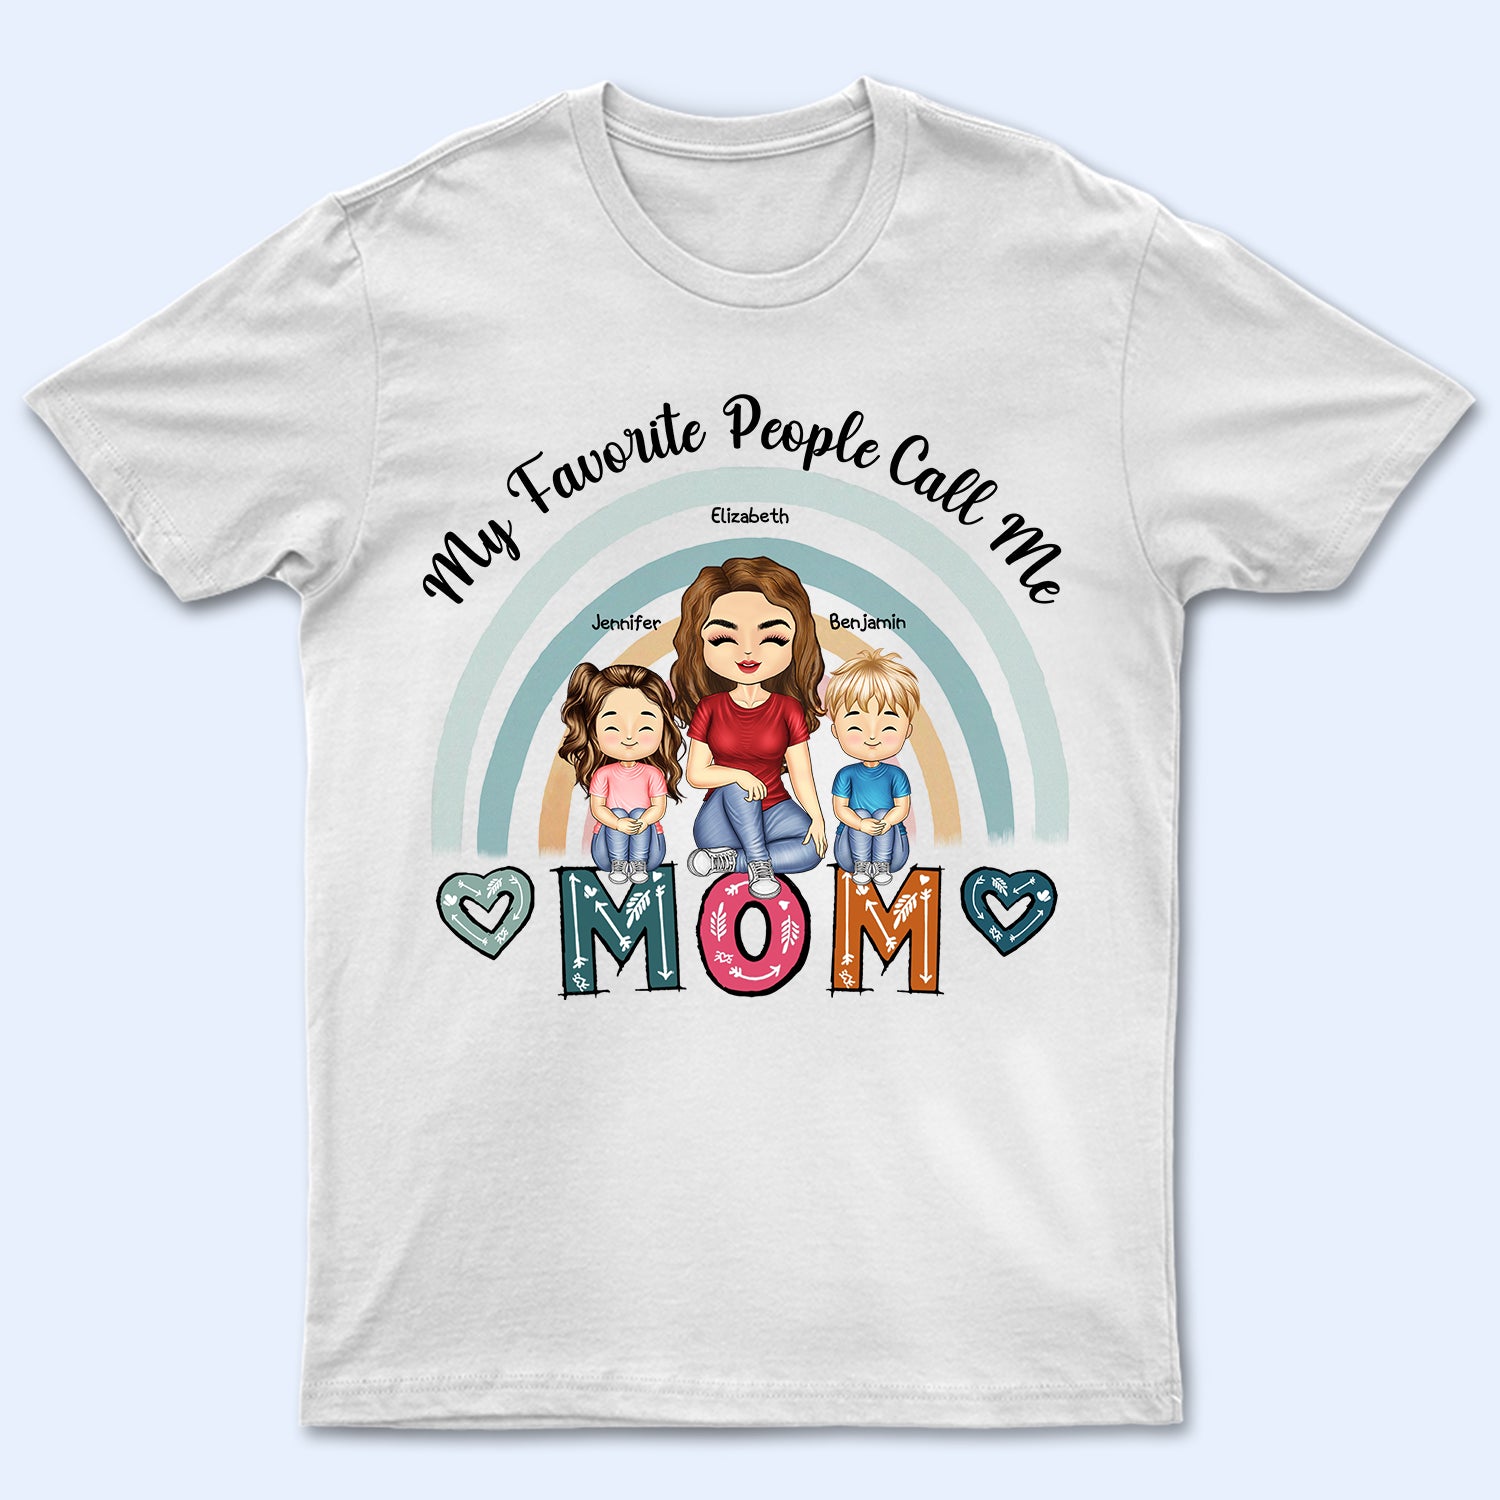 My Favorite People Call Me Mom Grandma - Birthday, Loving Gift For Mother, Grandmother - Personalized Custom T Shirt